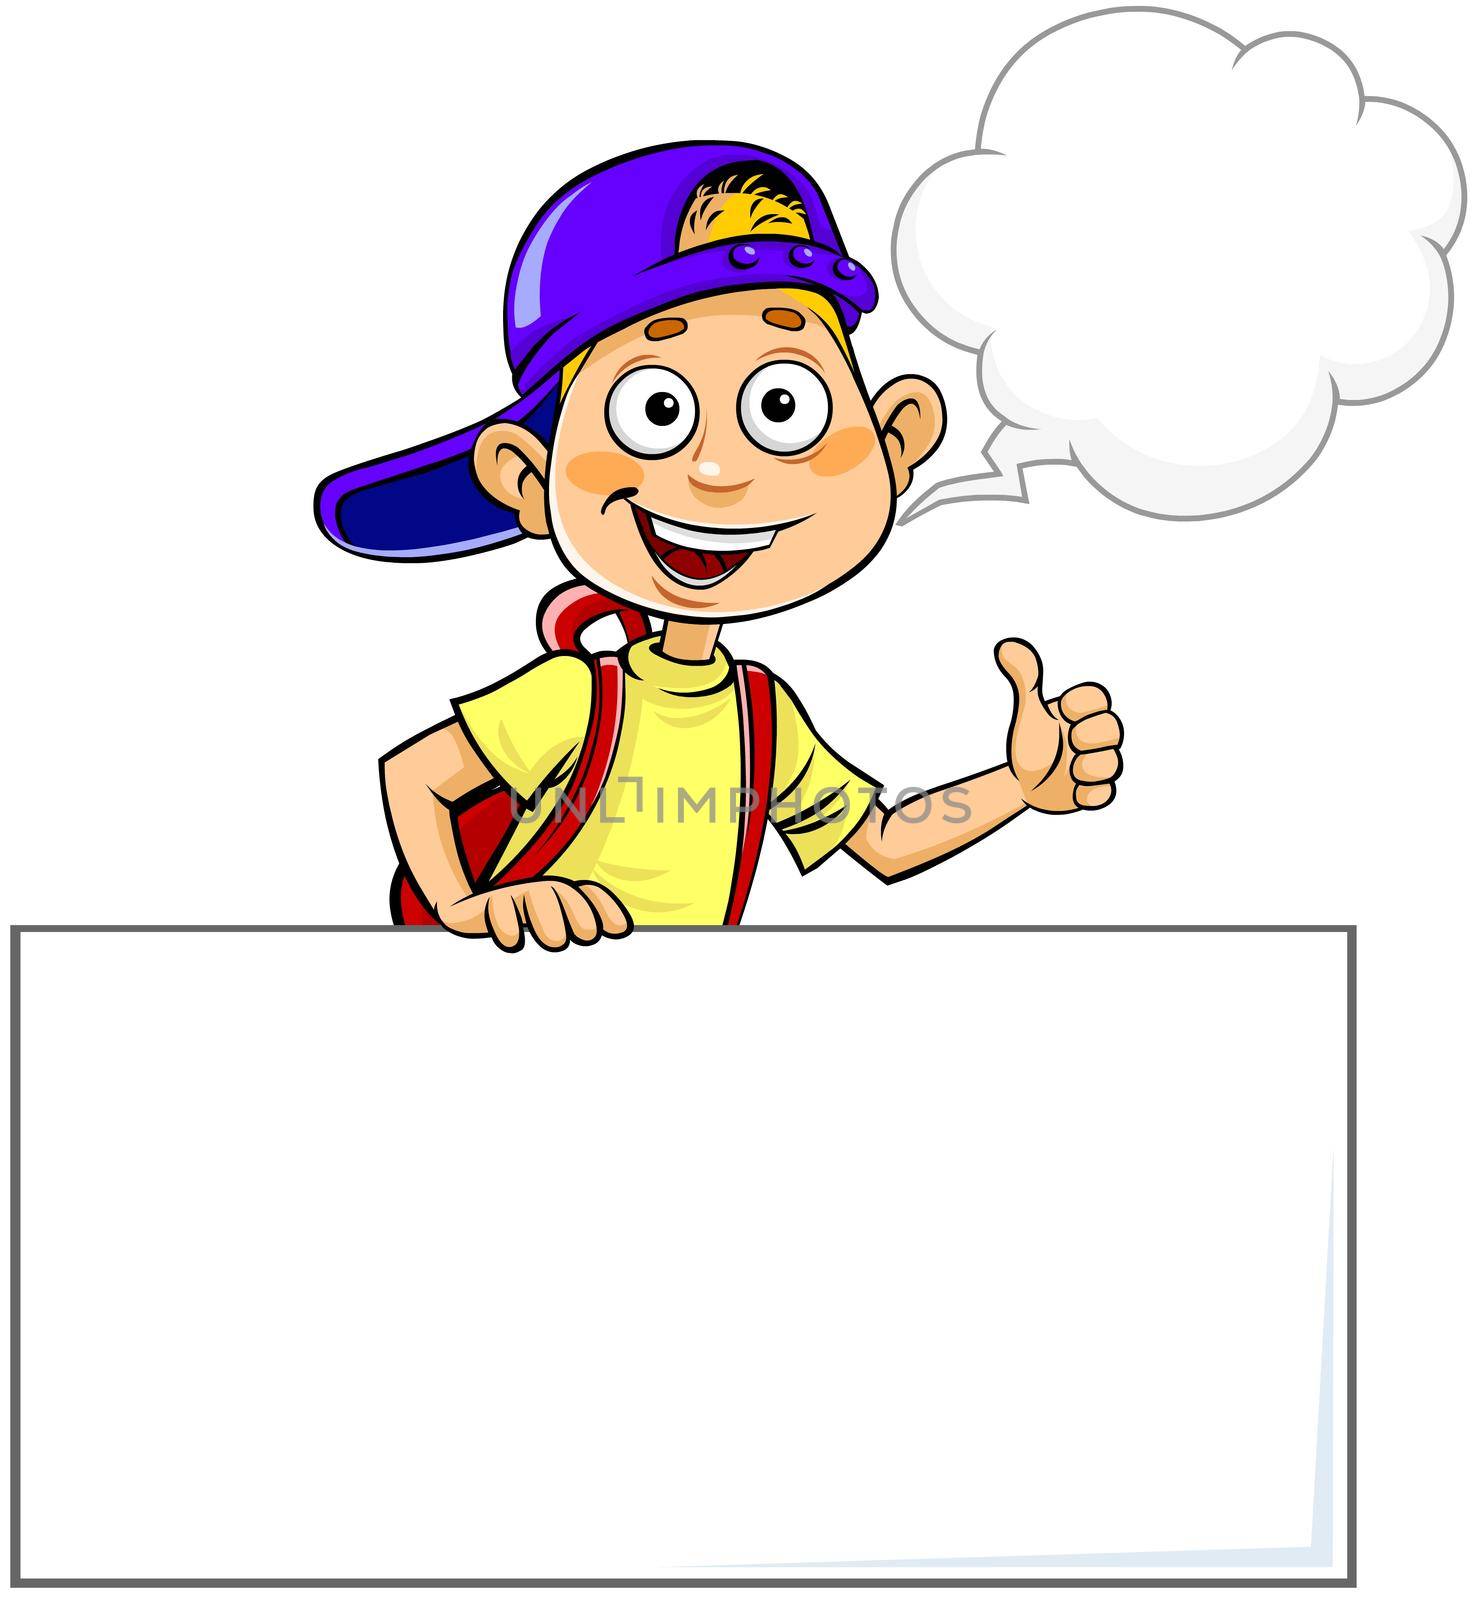 Color vector illustration of a cartoon schoolboy gesturing Thumb Up and speaking with speech bubble